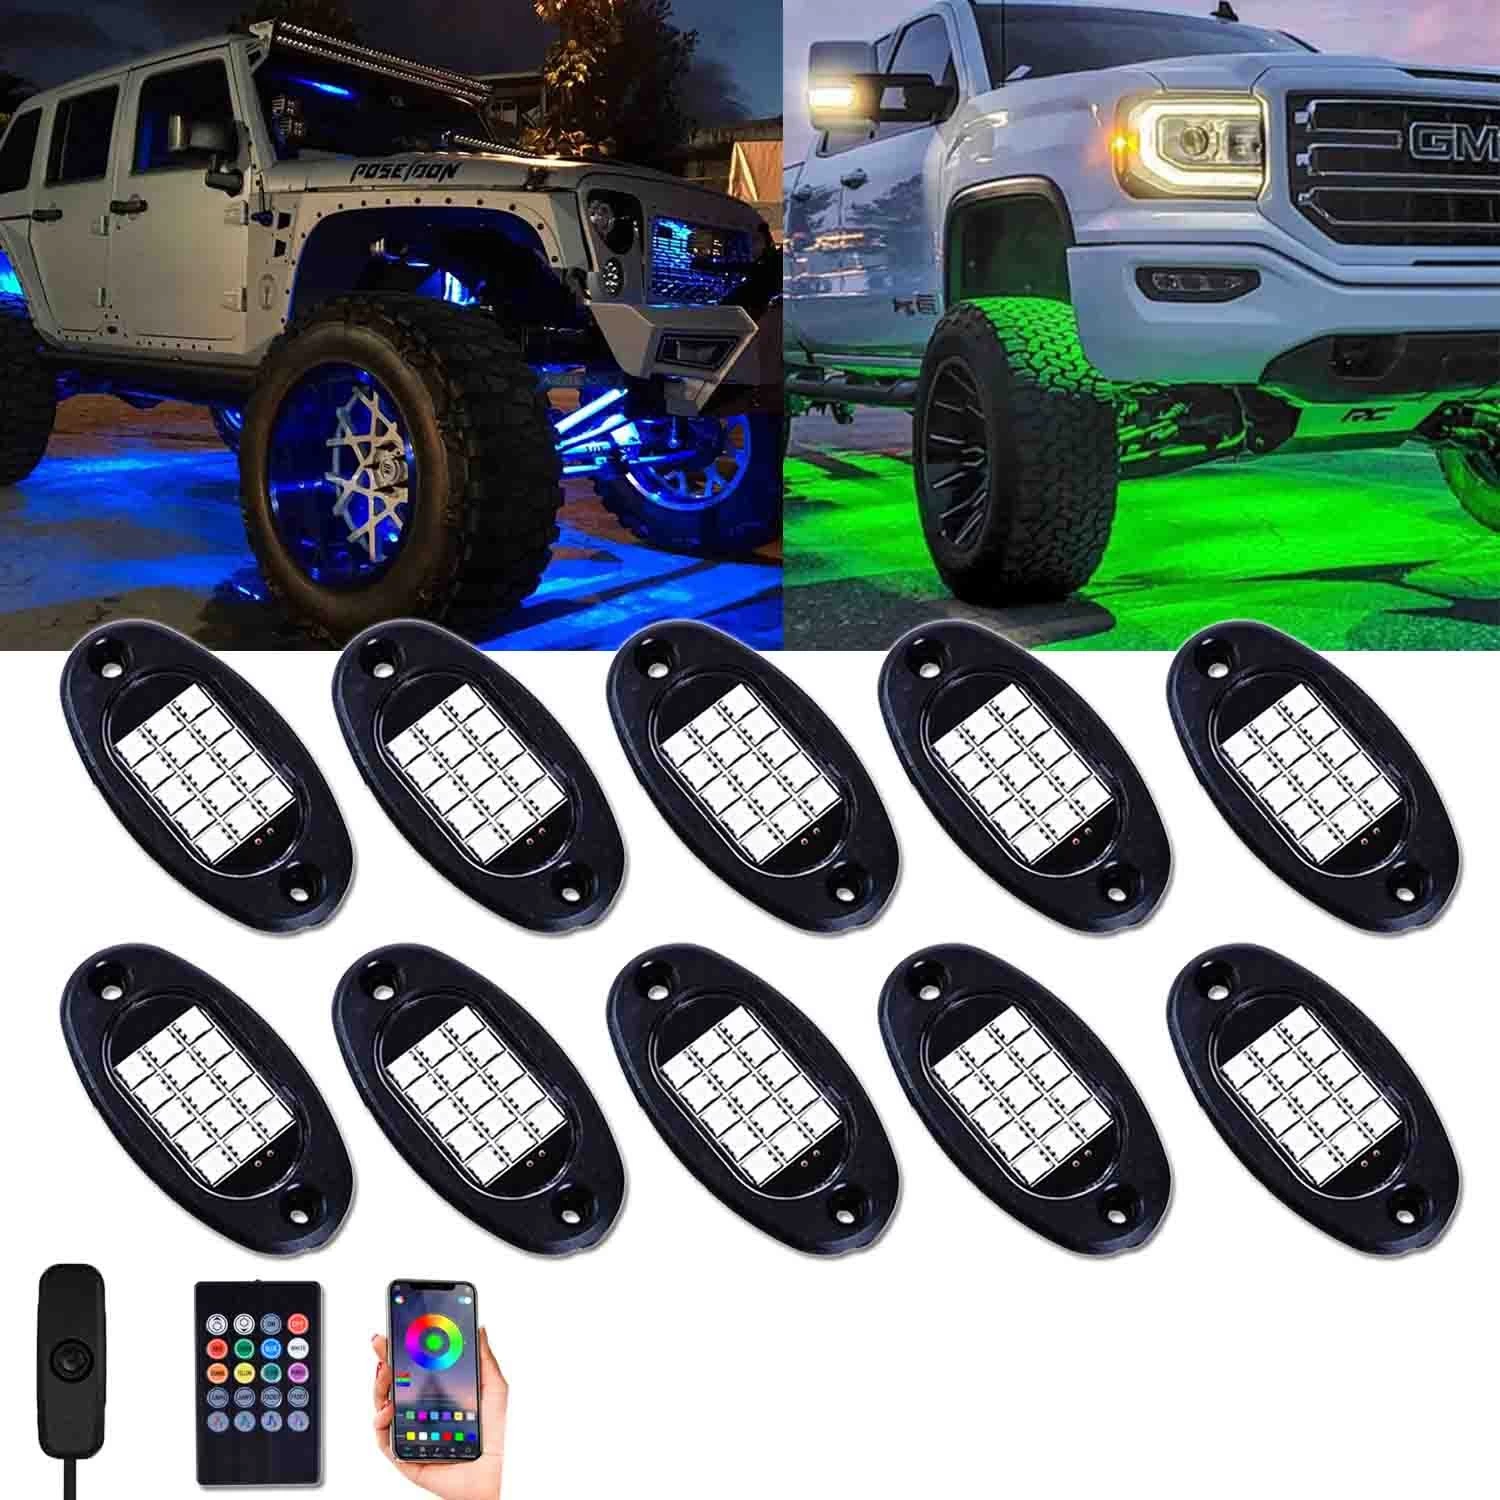 Chiny Unionlux RGB LED Rock Lights 60 LEDs Multicolor Underglow Neon Lights Waterproof Aluminum Light Kit with RF/APP Control Music Mode Timing Function for Truck Jeep Off Road Car UTV ATV SUV 8 Packs producent